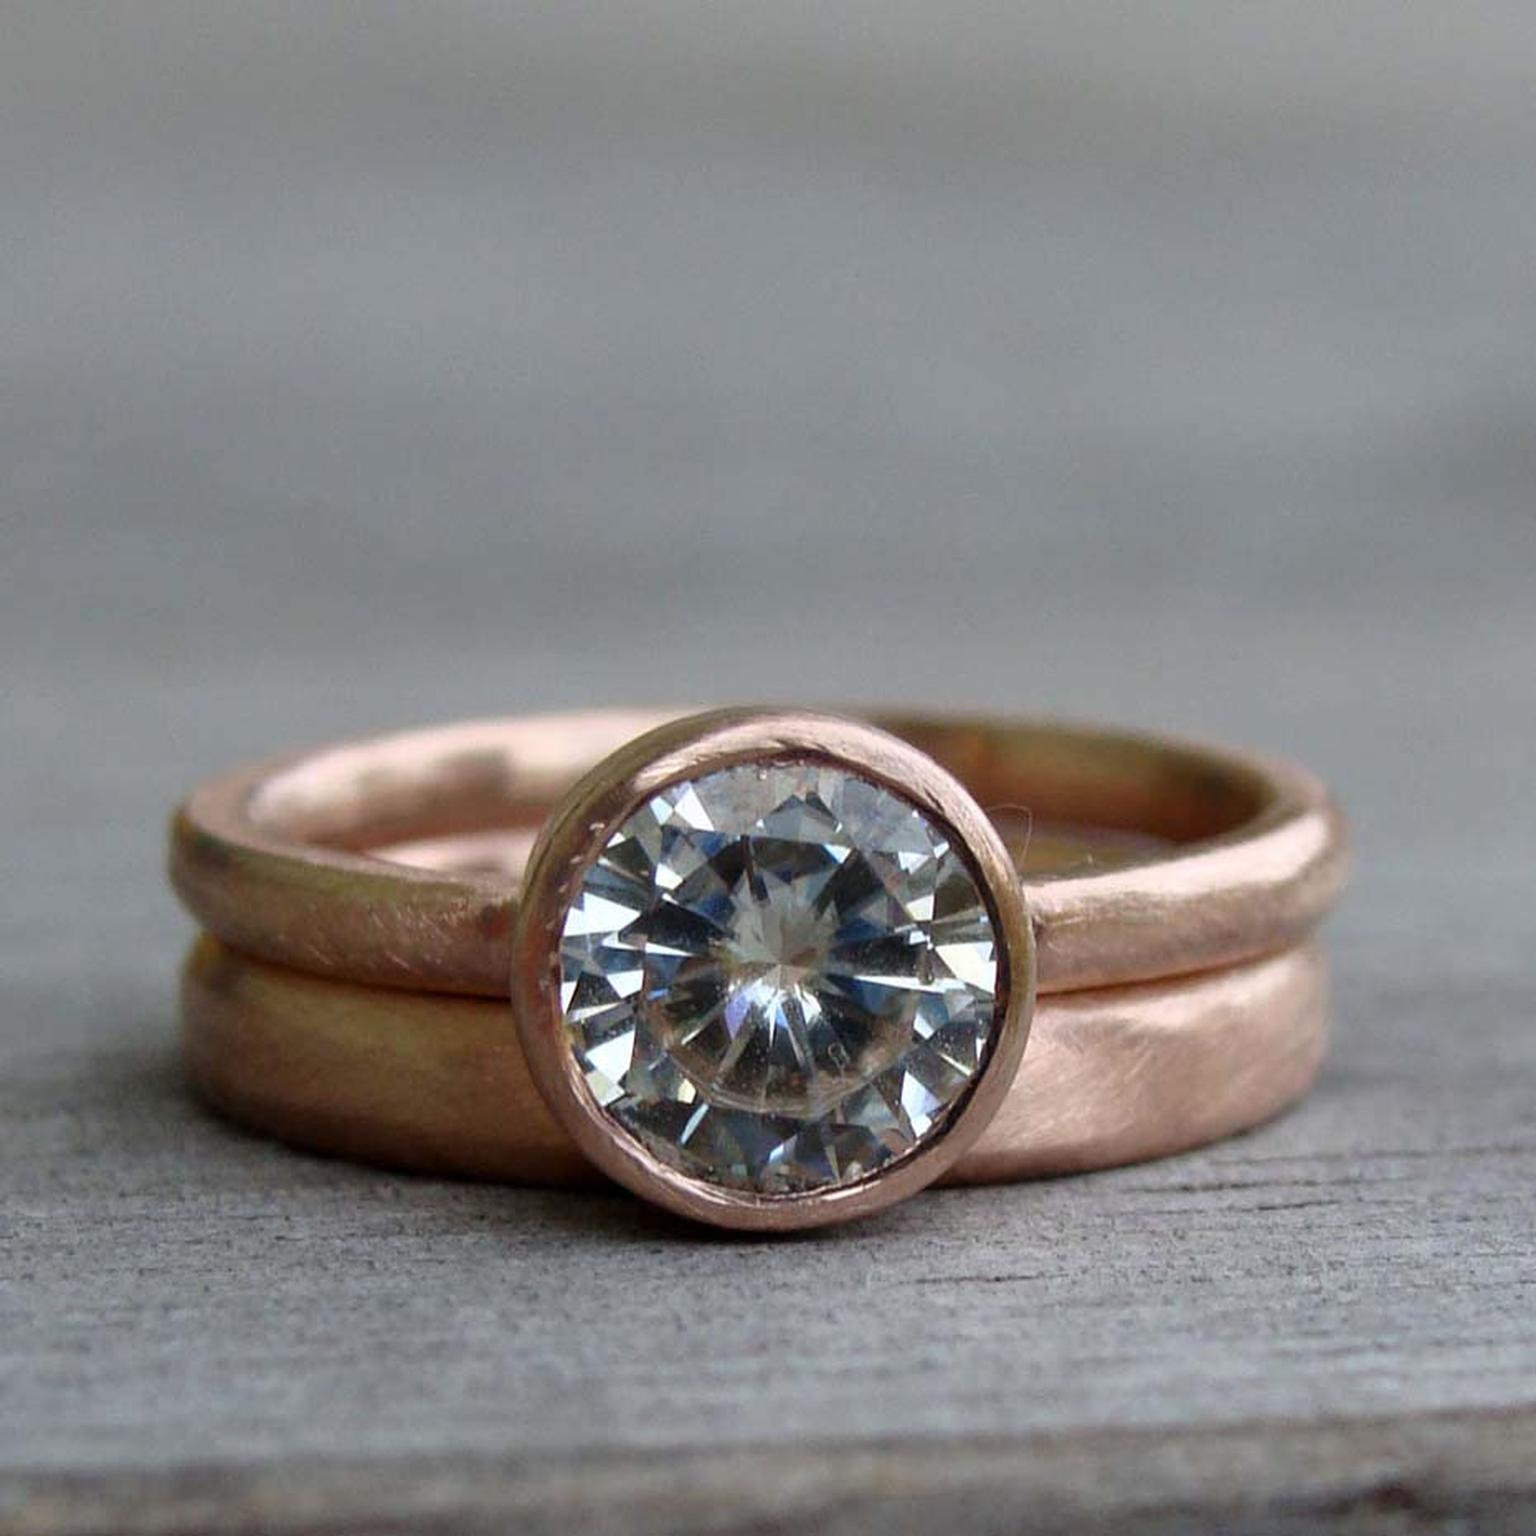 A desire for ethical engagement rings fuels rise in sustainable bridal jewels in the US